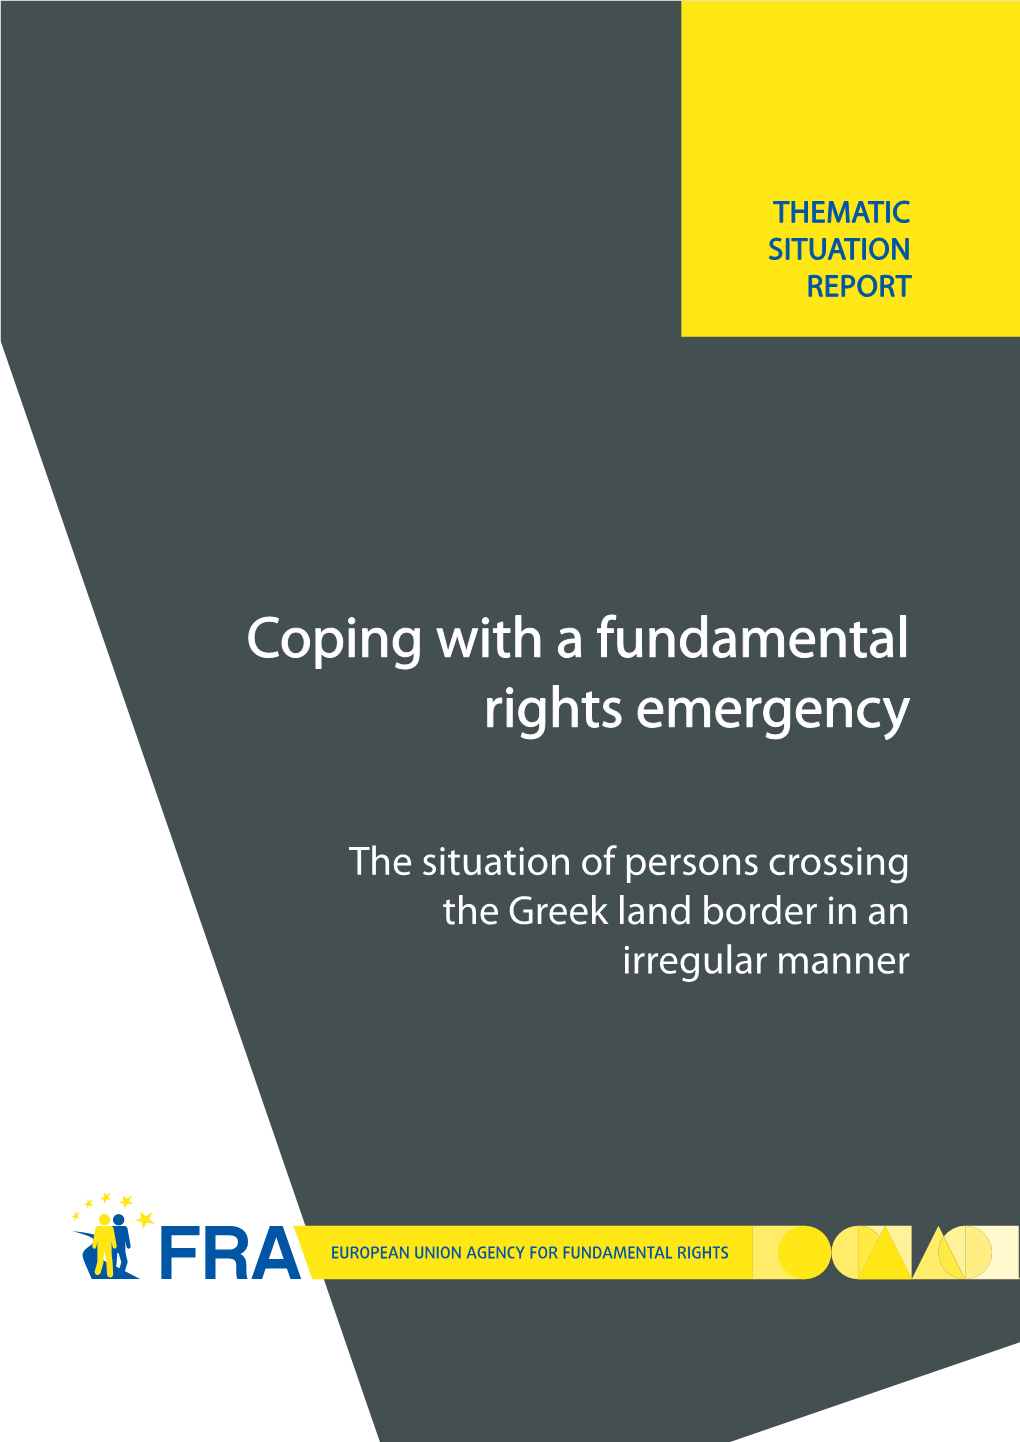 The Situation of Persons Crossing the Greek Land Border in an Irregular Manner © FRA - European Union Agency for Fundamental Rights, 2011